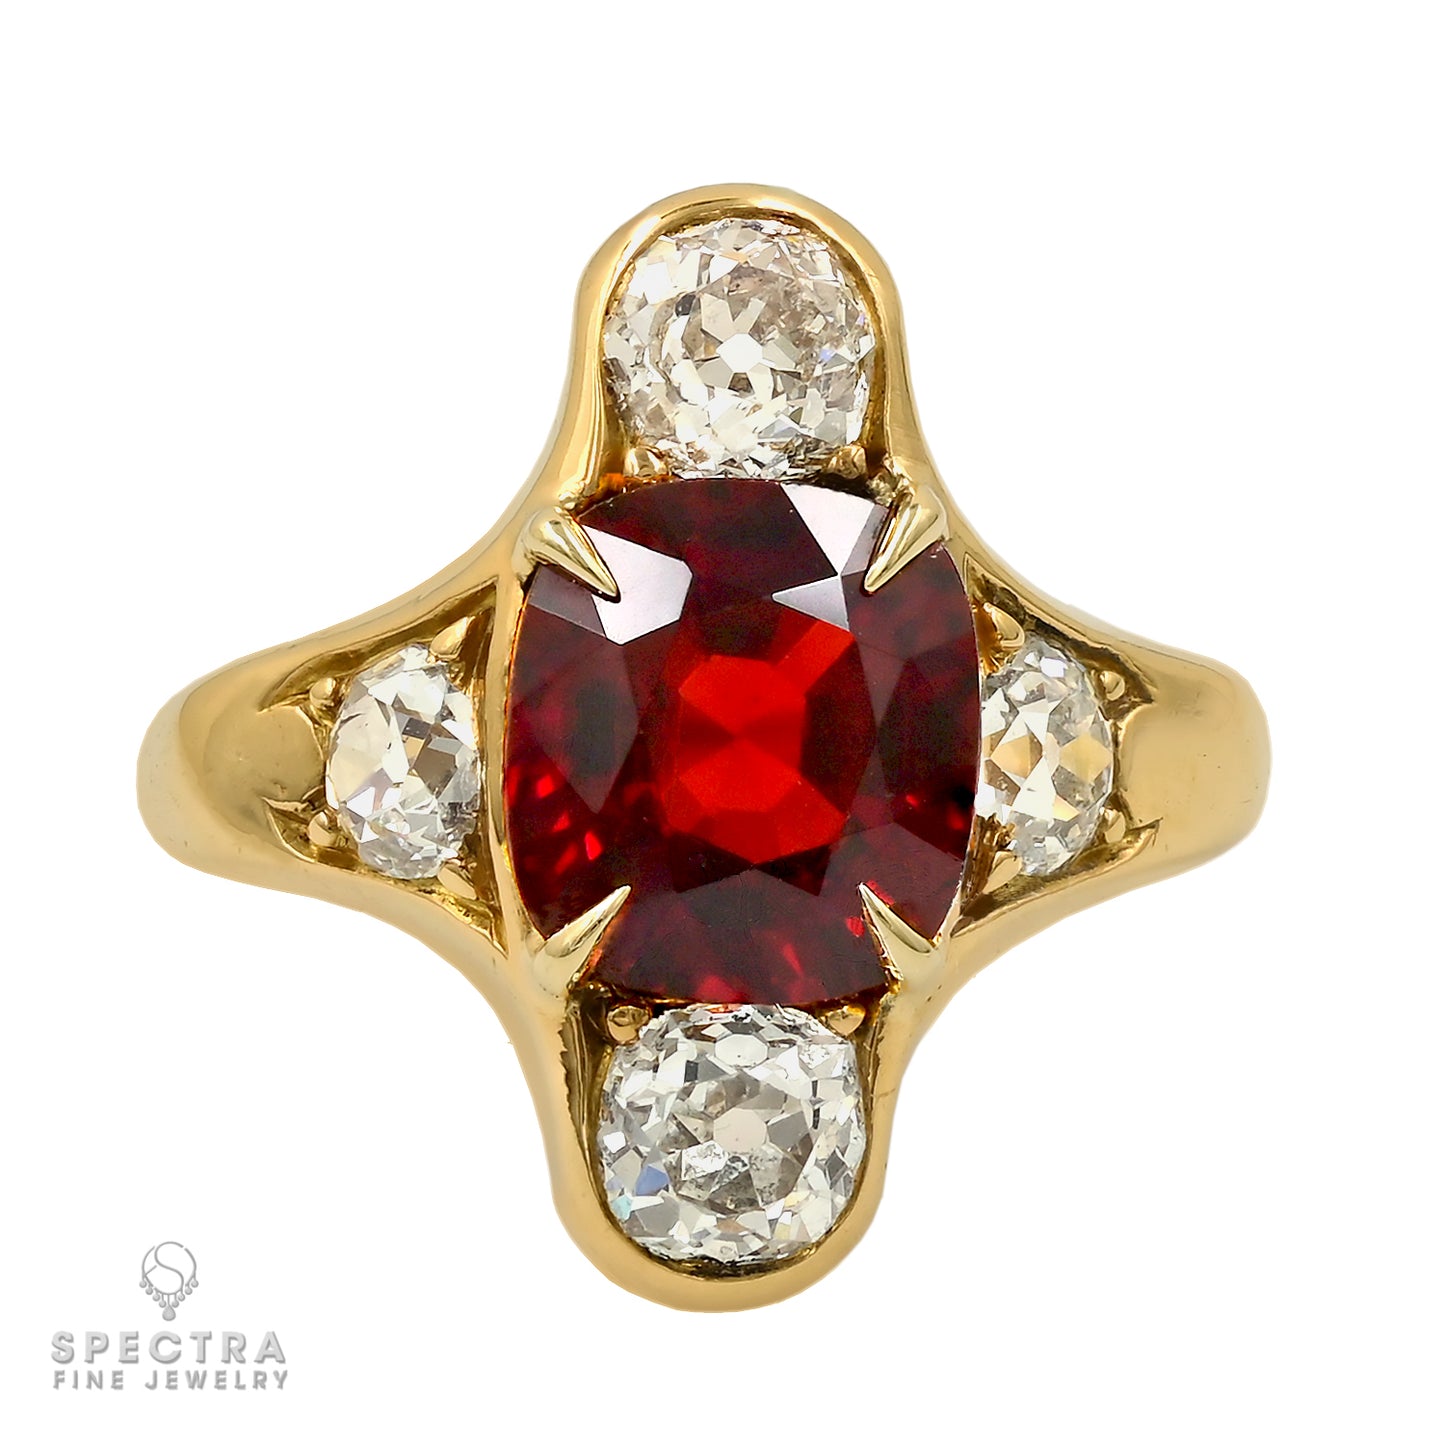 3.60ct Cushion Cut Burma Red Spinel and Diamond Ring